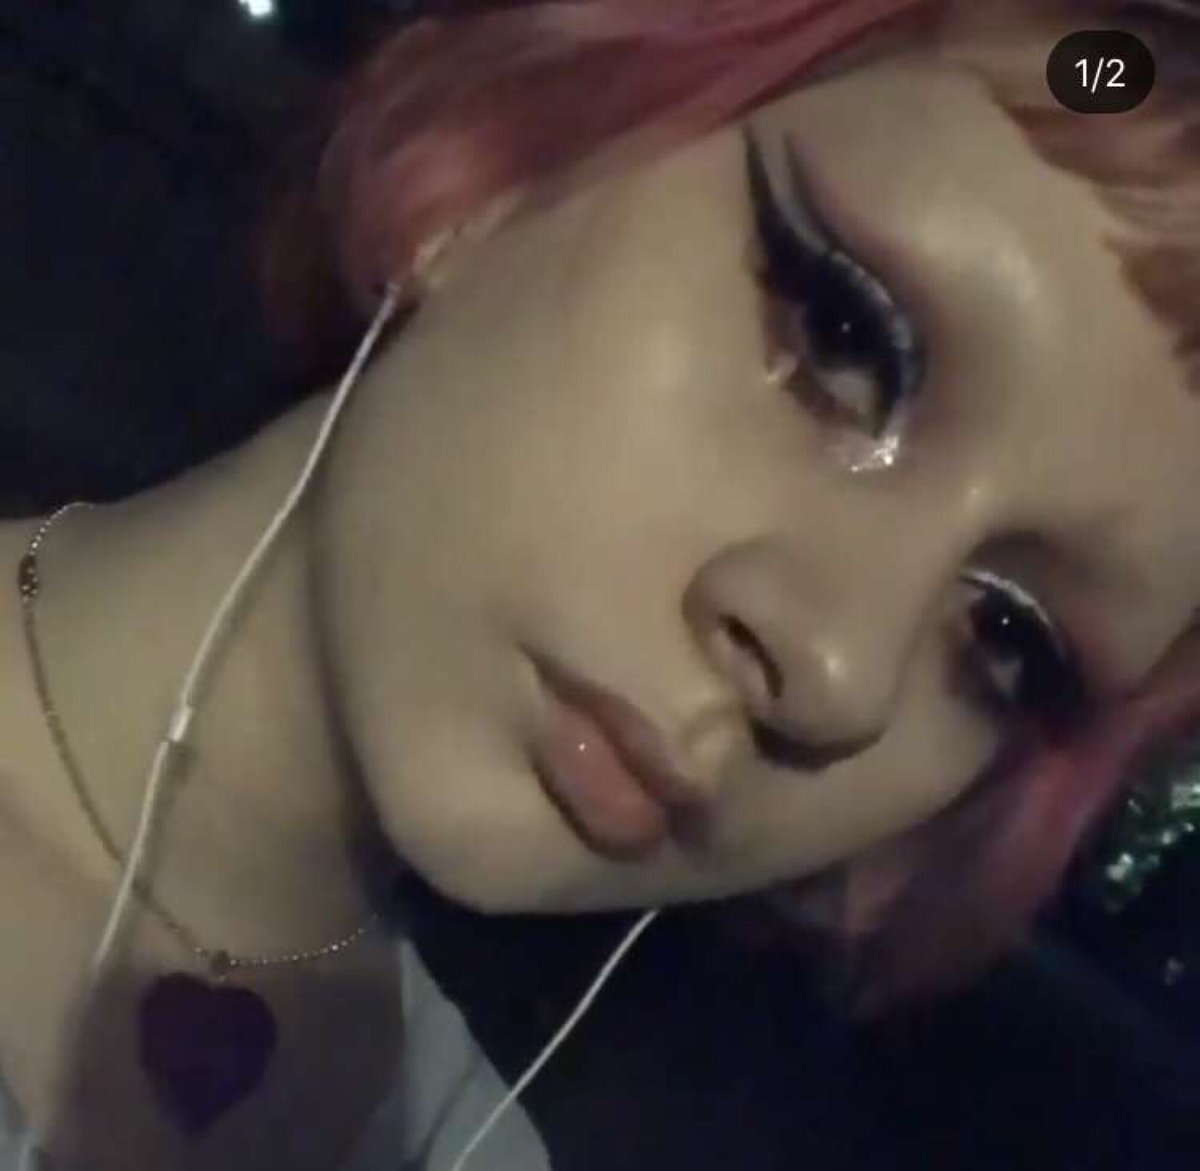 MEMPHIS MUSIC & COSPLAY SCENE!! PLEASE WATCH OUT FOR THIS GIRL! She uses different names Anna/Bella/Punky/Ilva/etc. She is notorious for lying about her age to adult men in the scene. There are countless stories about her doing this. Please read thread.